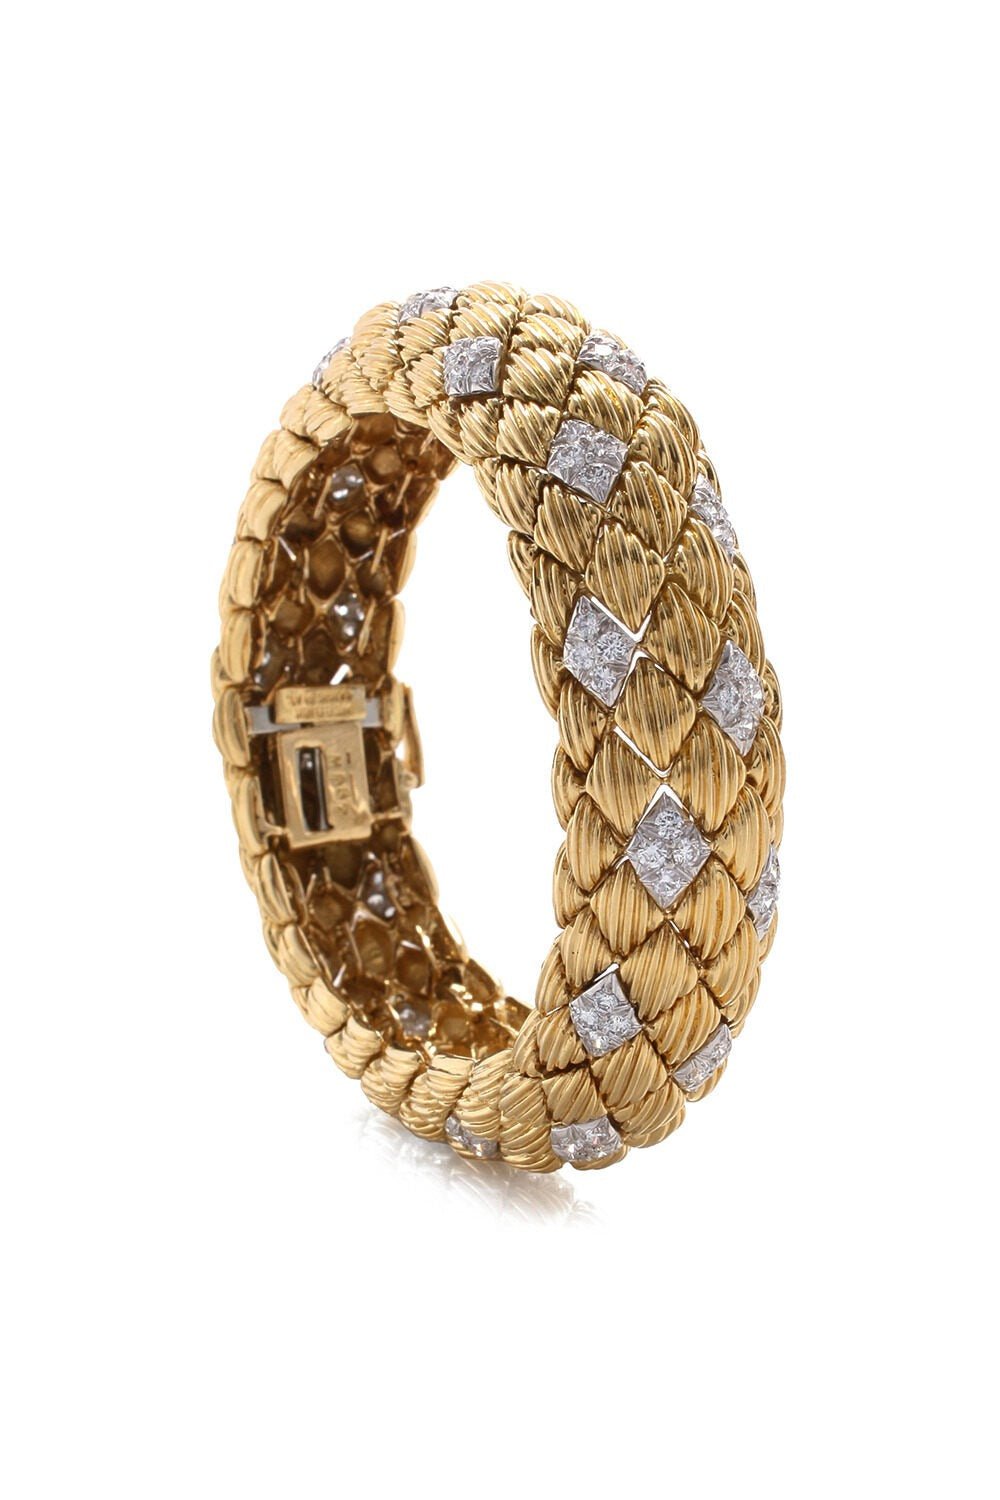 DAVID WEBB-Narrow Quilted Bracelet-YELLOW GOLD